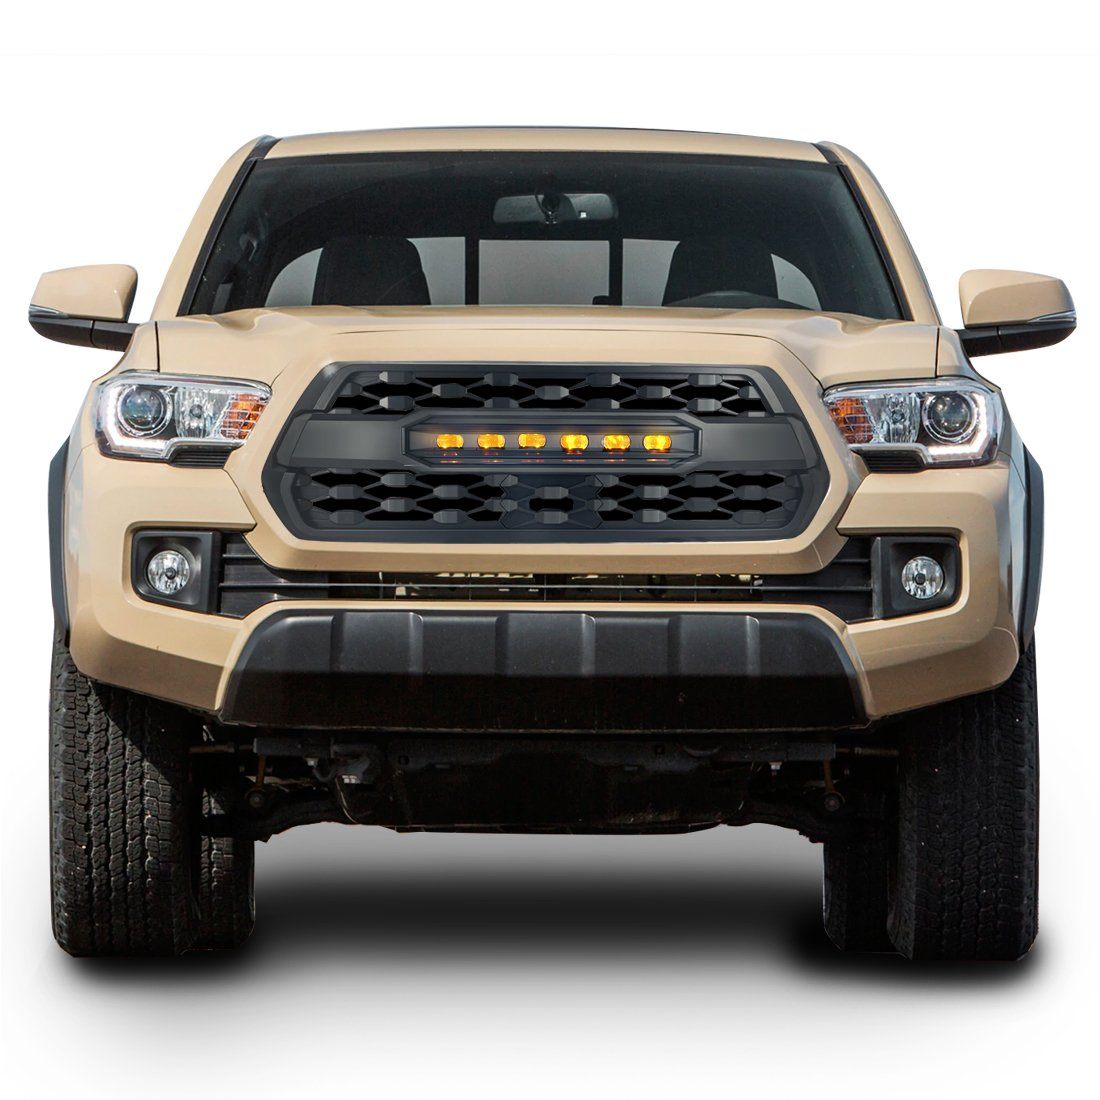 TRD PRO STYLE FRONT GRILLE W/ LED OFF-ROAD LIGHTS FOR 2016-2021 TOYOTA TACOMA- MATTE BLACK